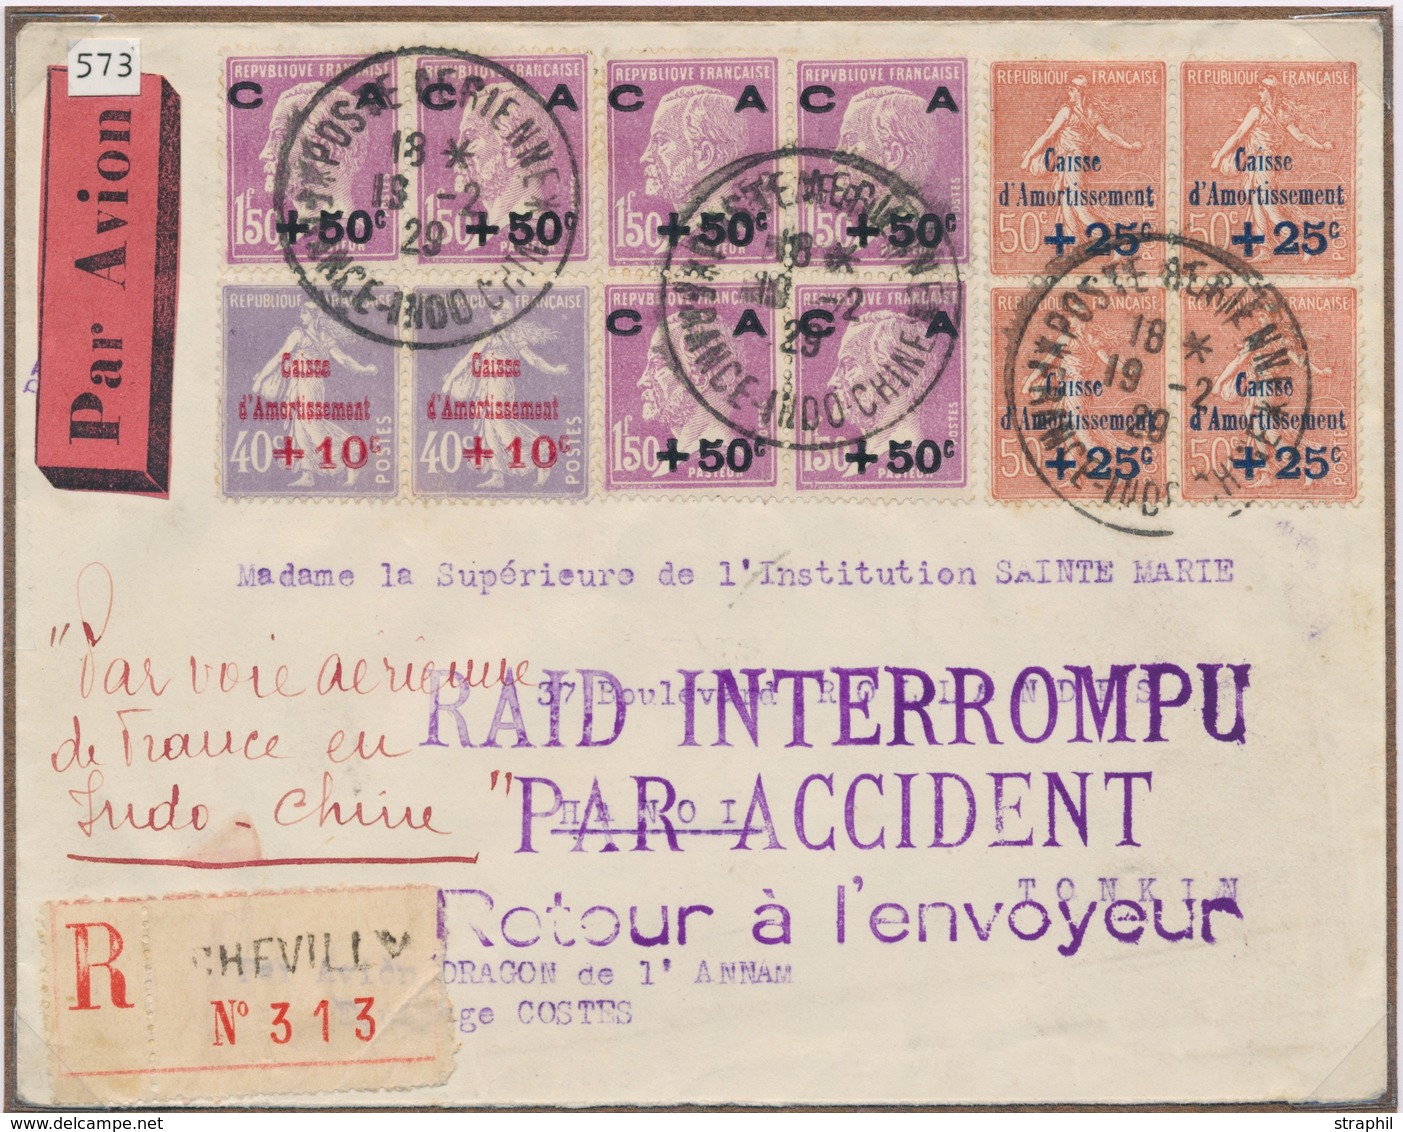 L CA Sur Lettre - L - N°249 Paire , 25 Bloc De 4, 251 X6 Dt Bloc De 4 - Obl Gd Cachet PA /France Indochine - 19/2/29 S/r - Covers & Documents